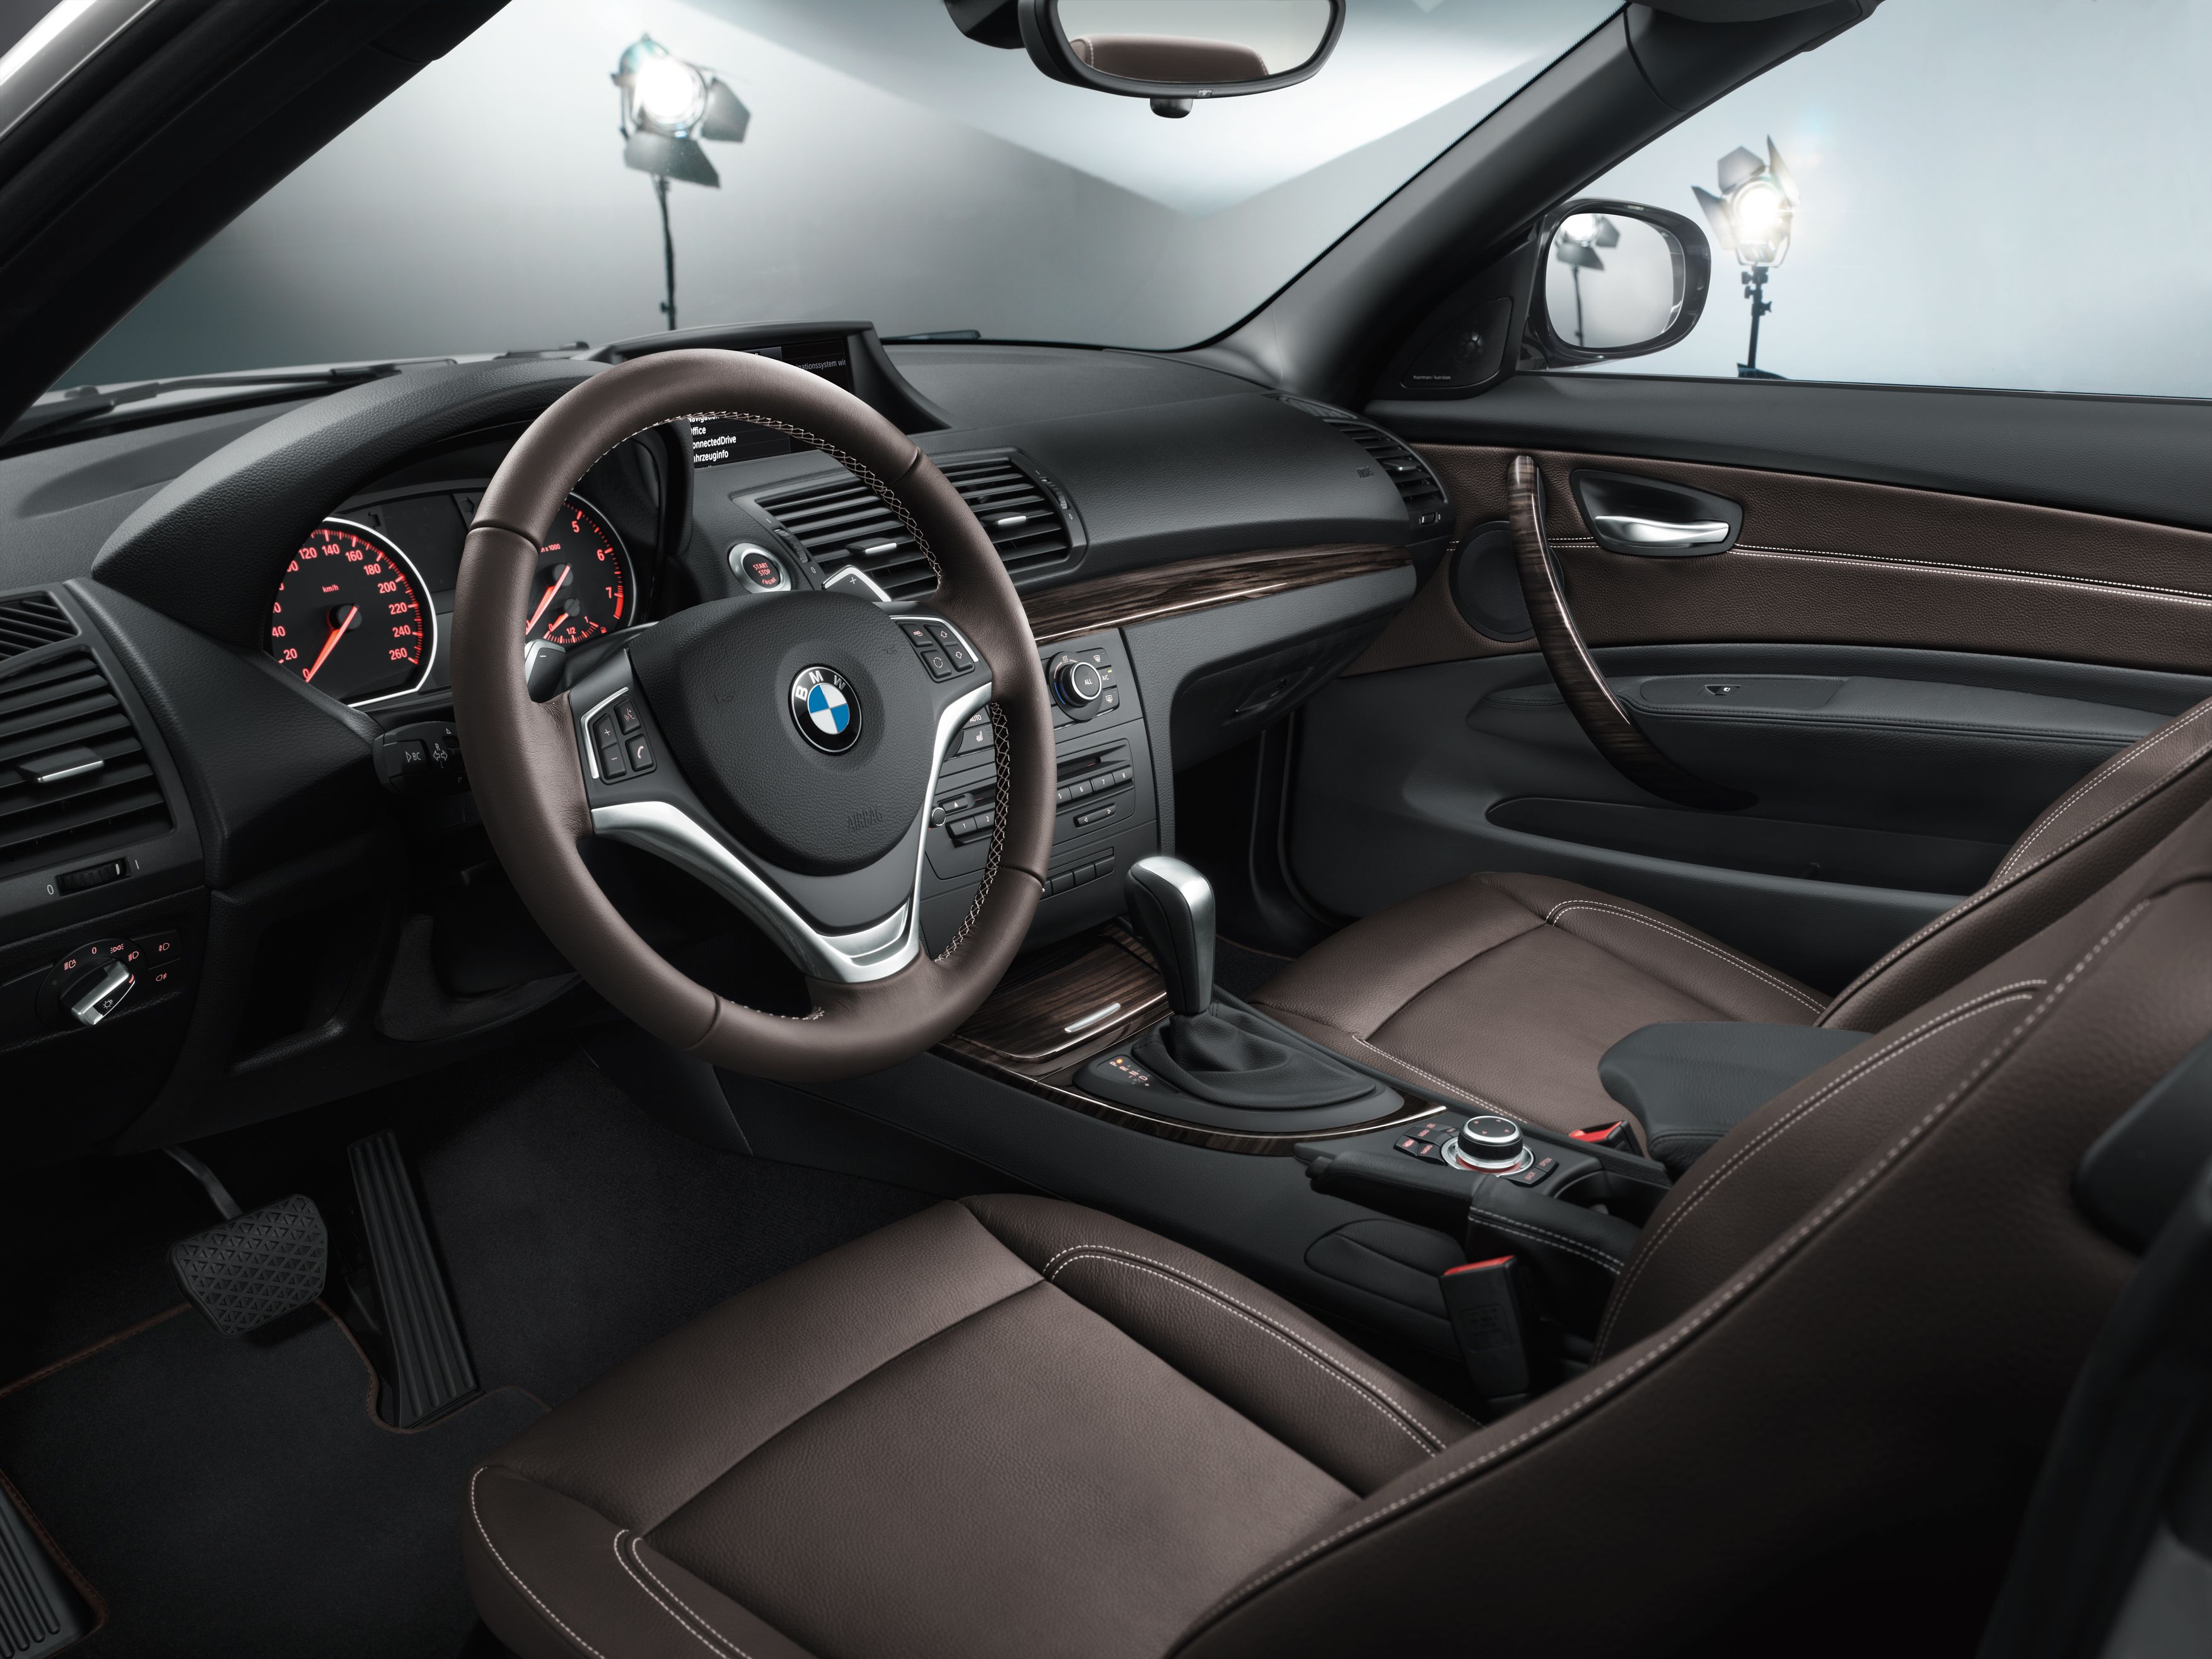 2013 BMW 1-Series Coupe and Convertible Lifestyle Editions